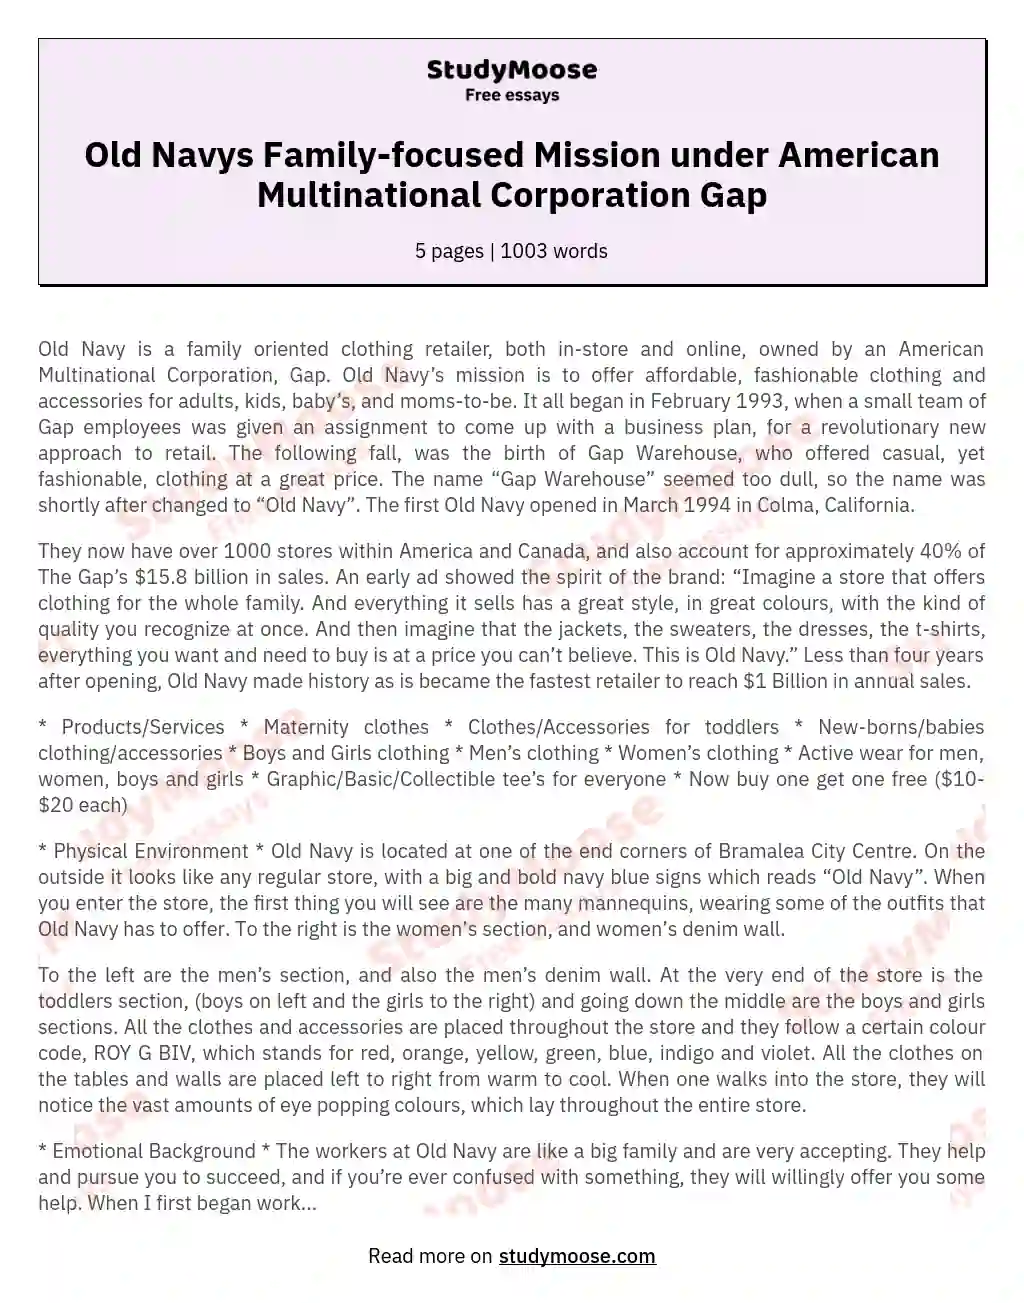 Old Navys Family-focused Mission under American Multinational Corporation Gap essay